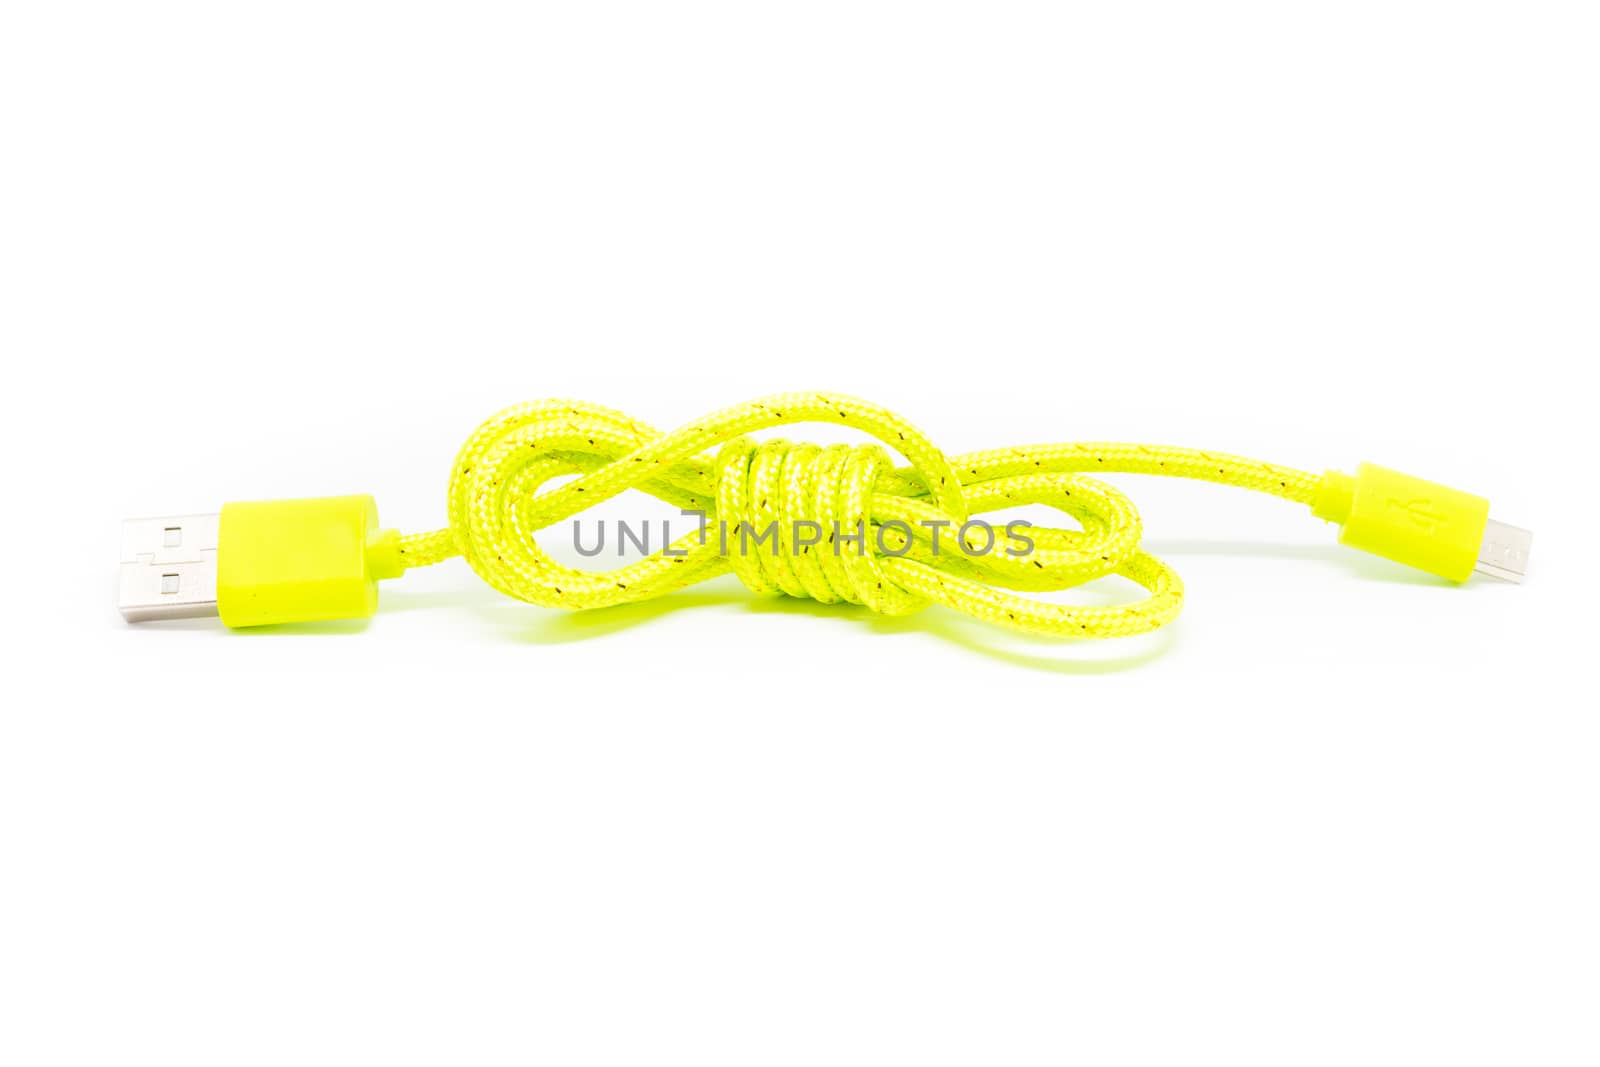 Portable micro USB charger for phone on white background ideal for travel item.